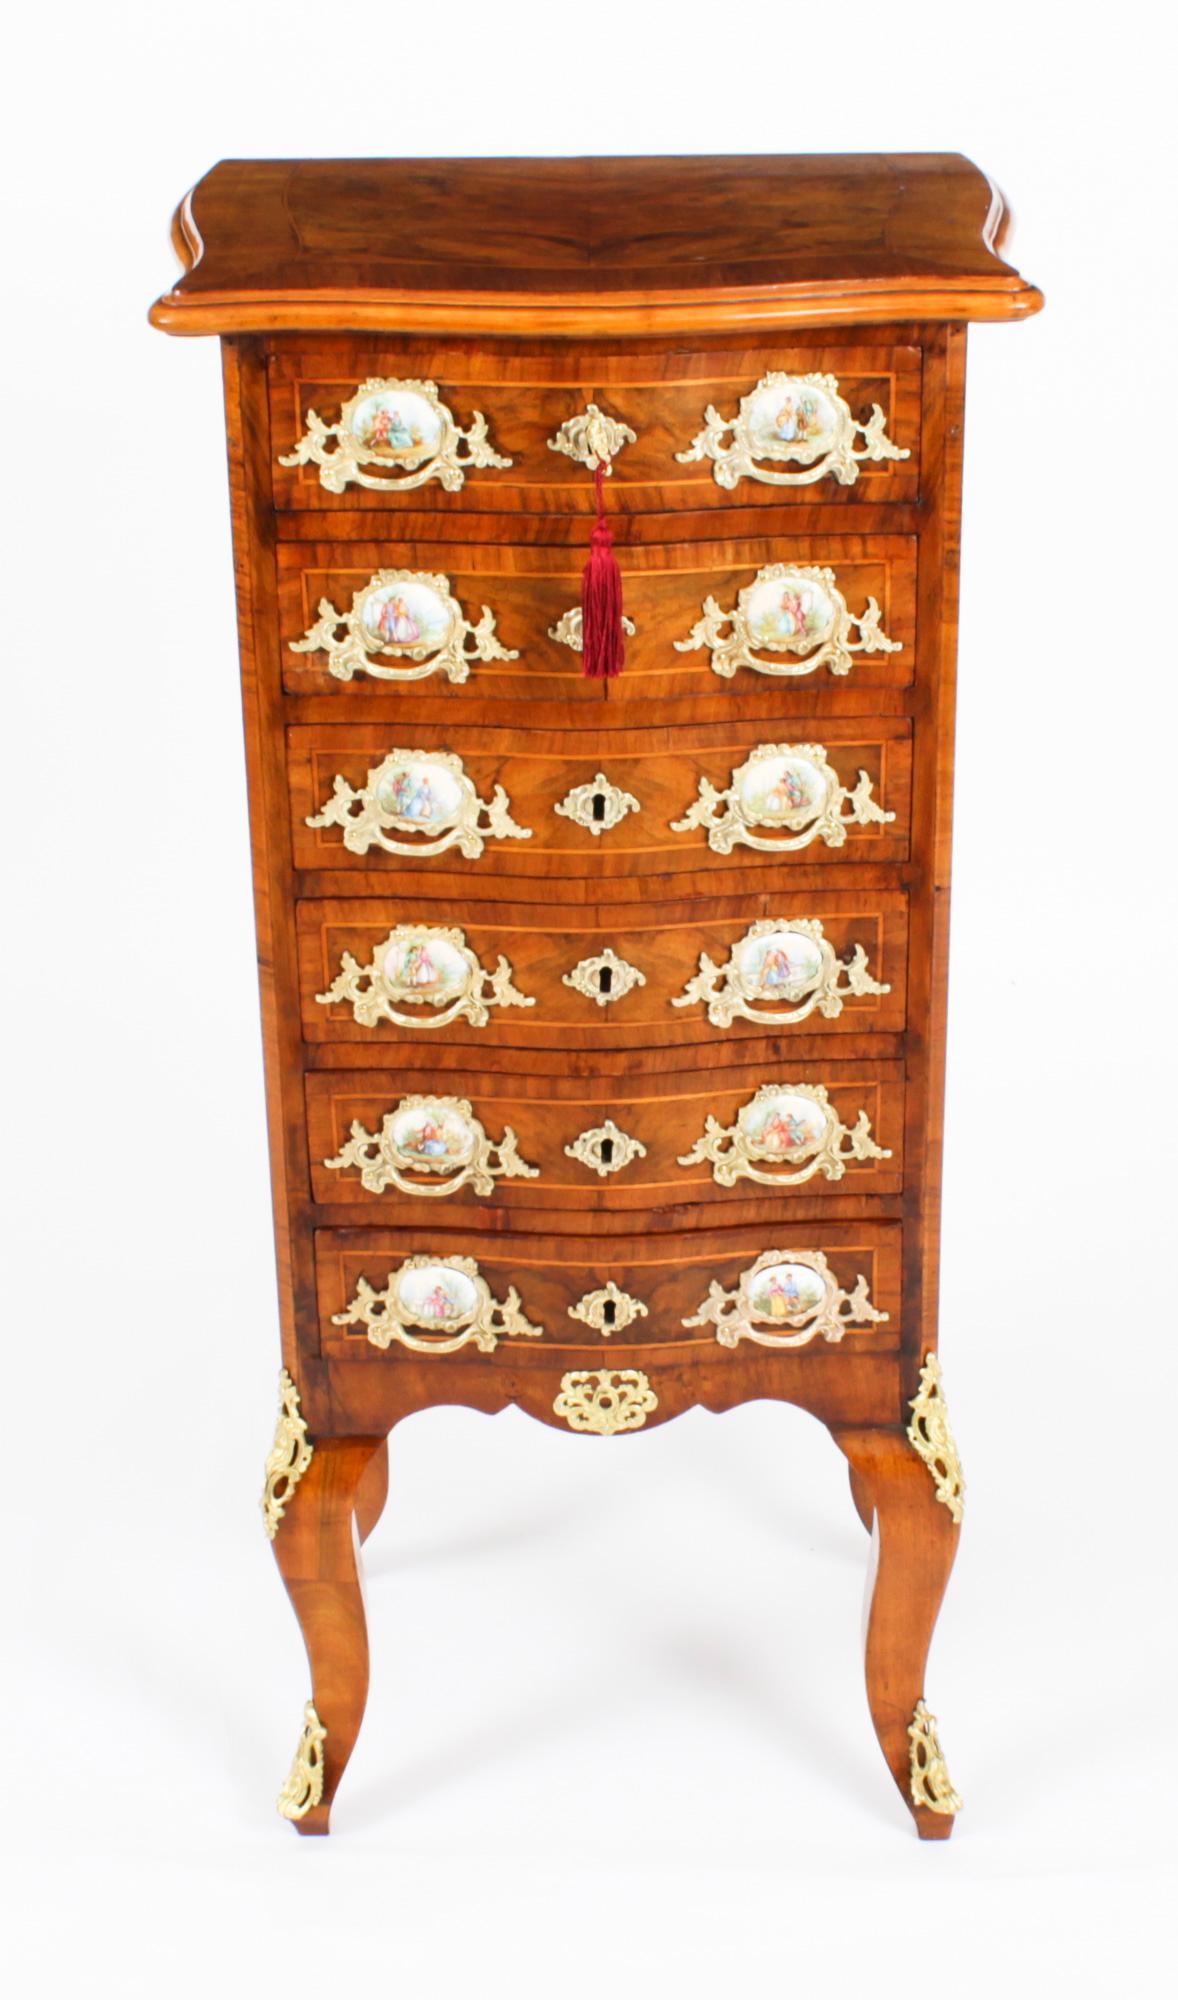 A stunning antique French serpentine fronted burr walnut chest of six drawers Circa 1870 in date.
 
Crafted from the most beautiful burr walnut with inlaid decoration and ormolu mounts. It has stunning ornate foliate ormolu handles with inset oval